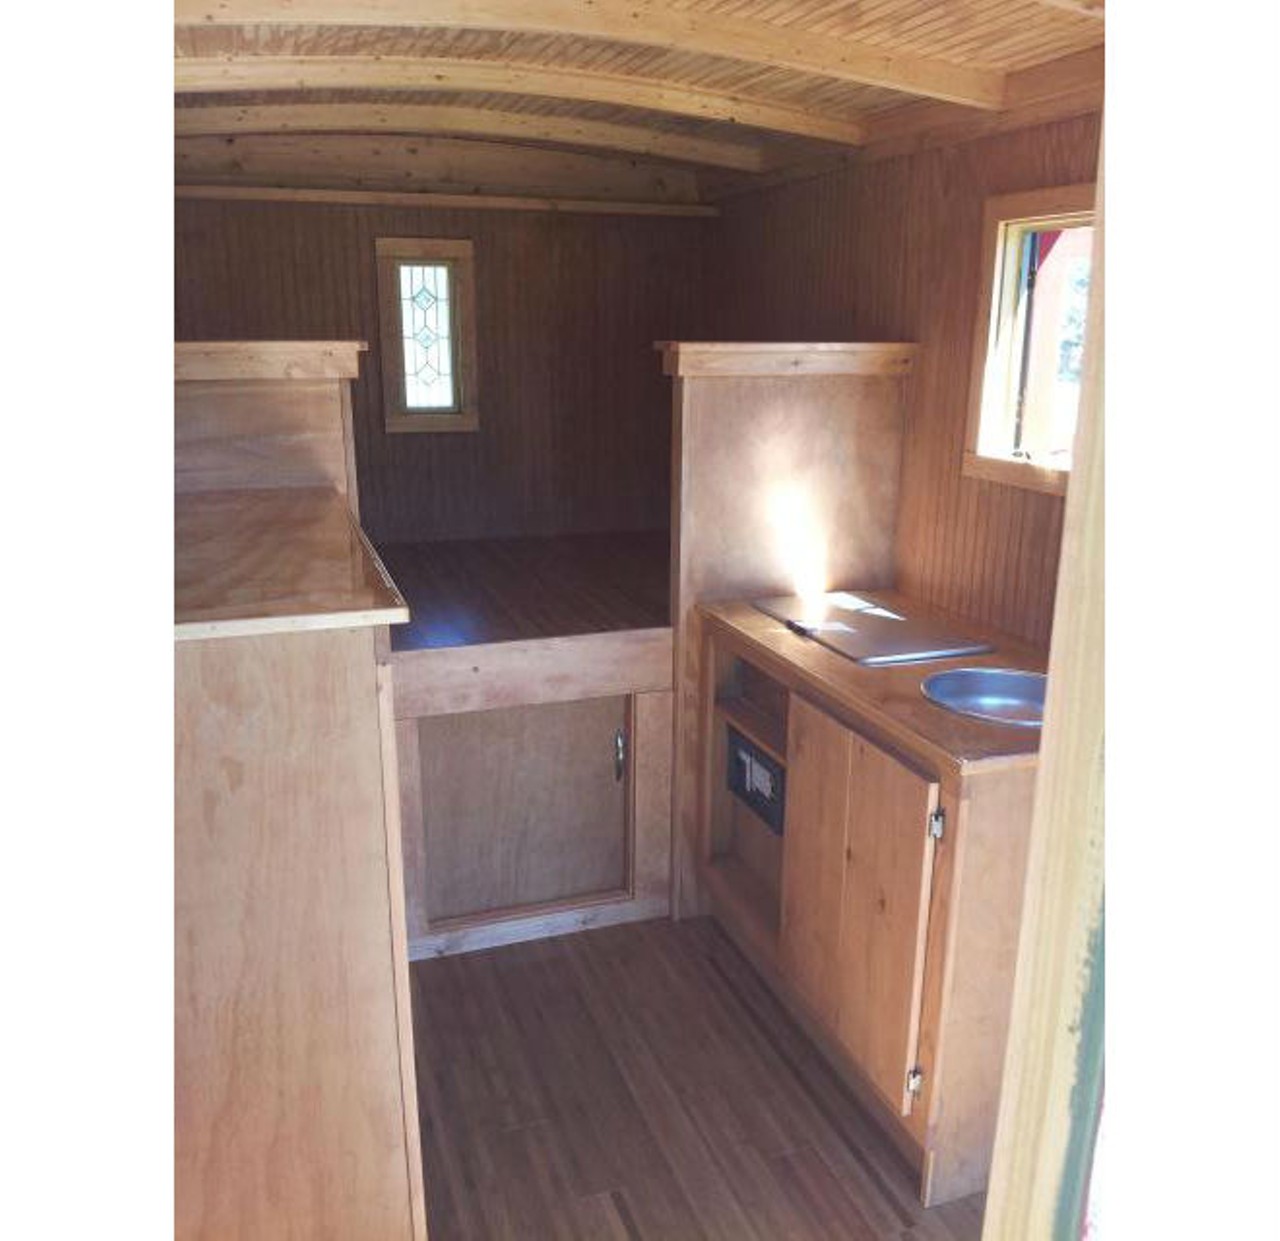 Gypsy Wagon Camper
Location: Clearwater
Price: $9250
Size: 90 sq ft 
Those windows are pretty cool.